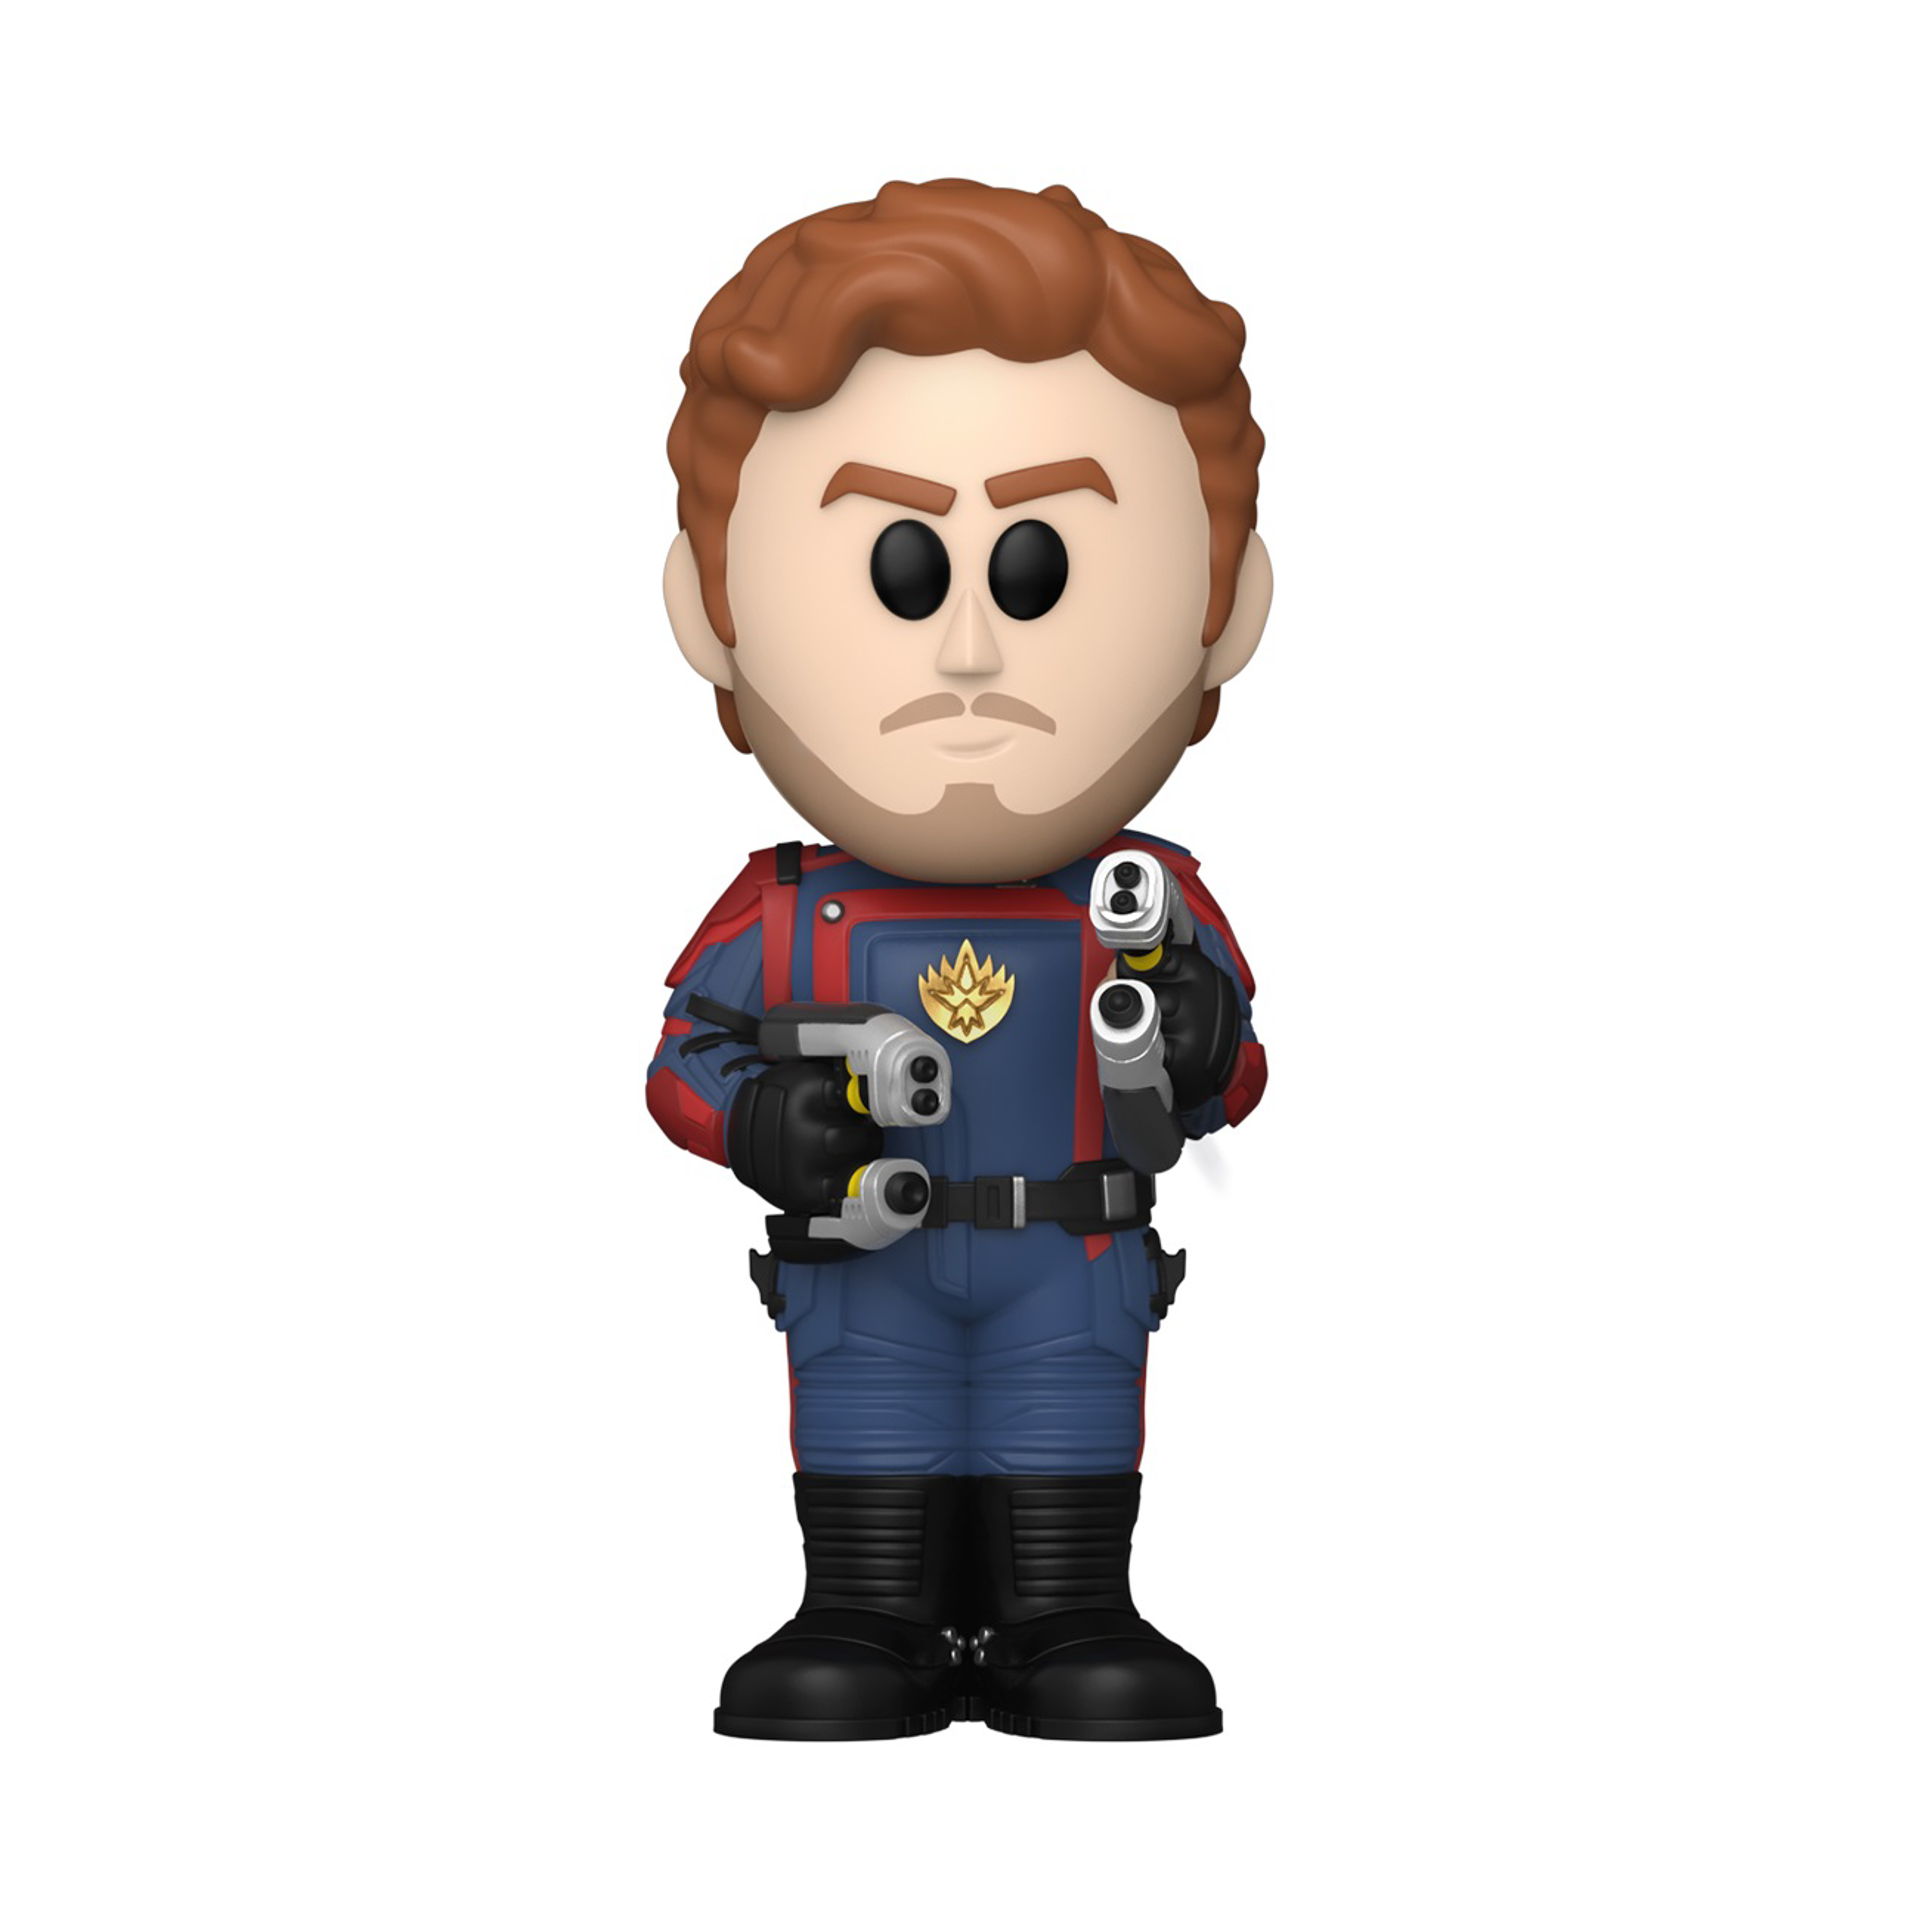 Funko Vinyl Soda: Guardians of the Galaxy 3 - Star-Lord (chance of special Chase edition)